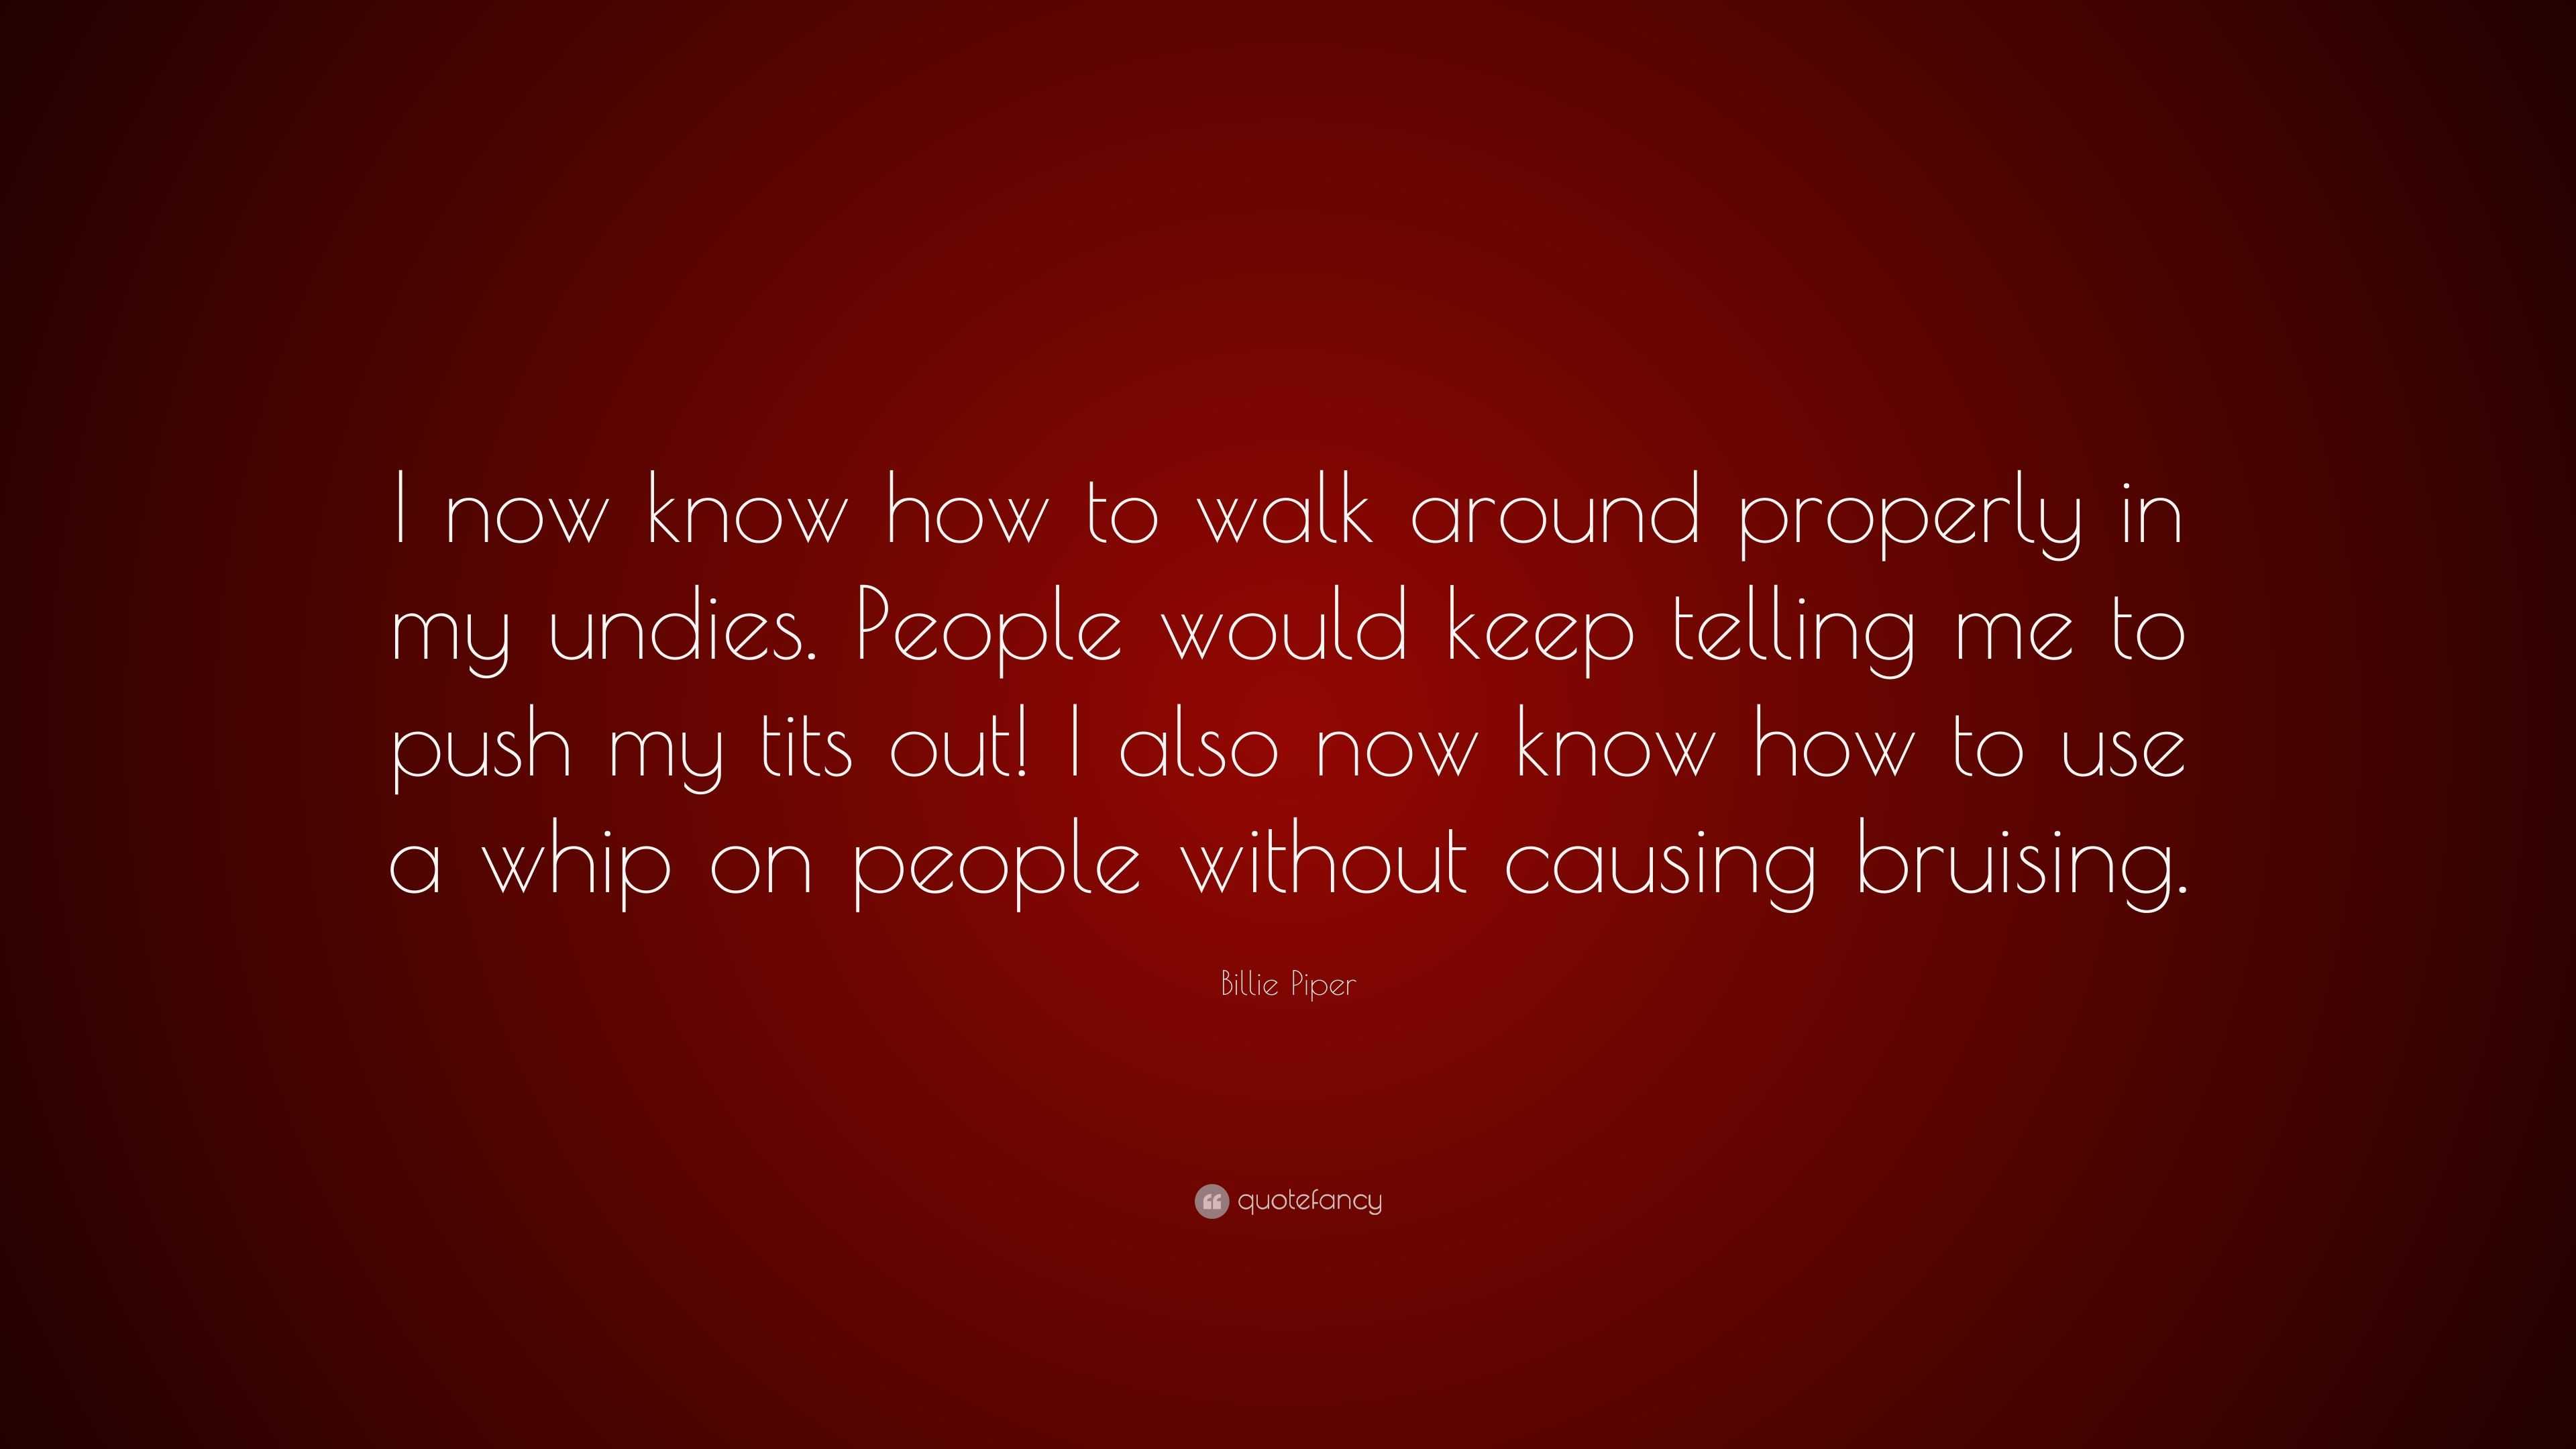 Billie Piper Quote: “I now know how to walk around properly in my